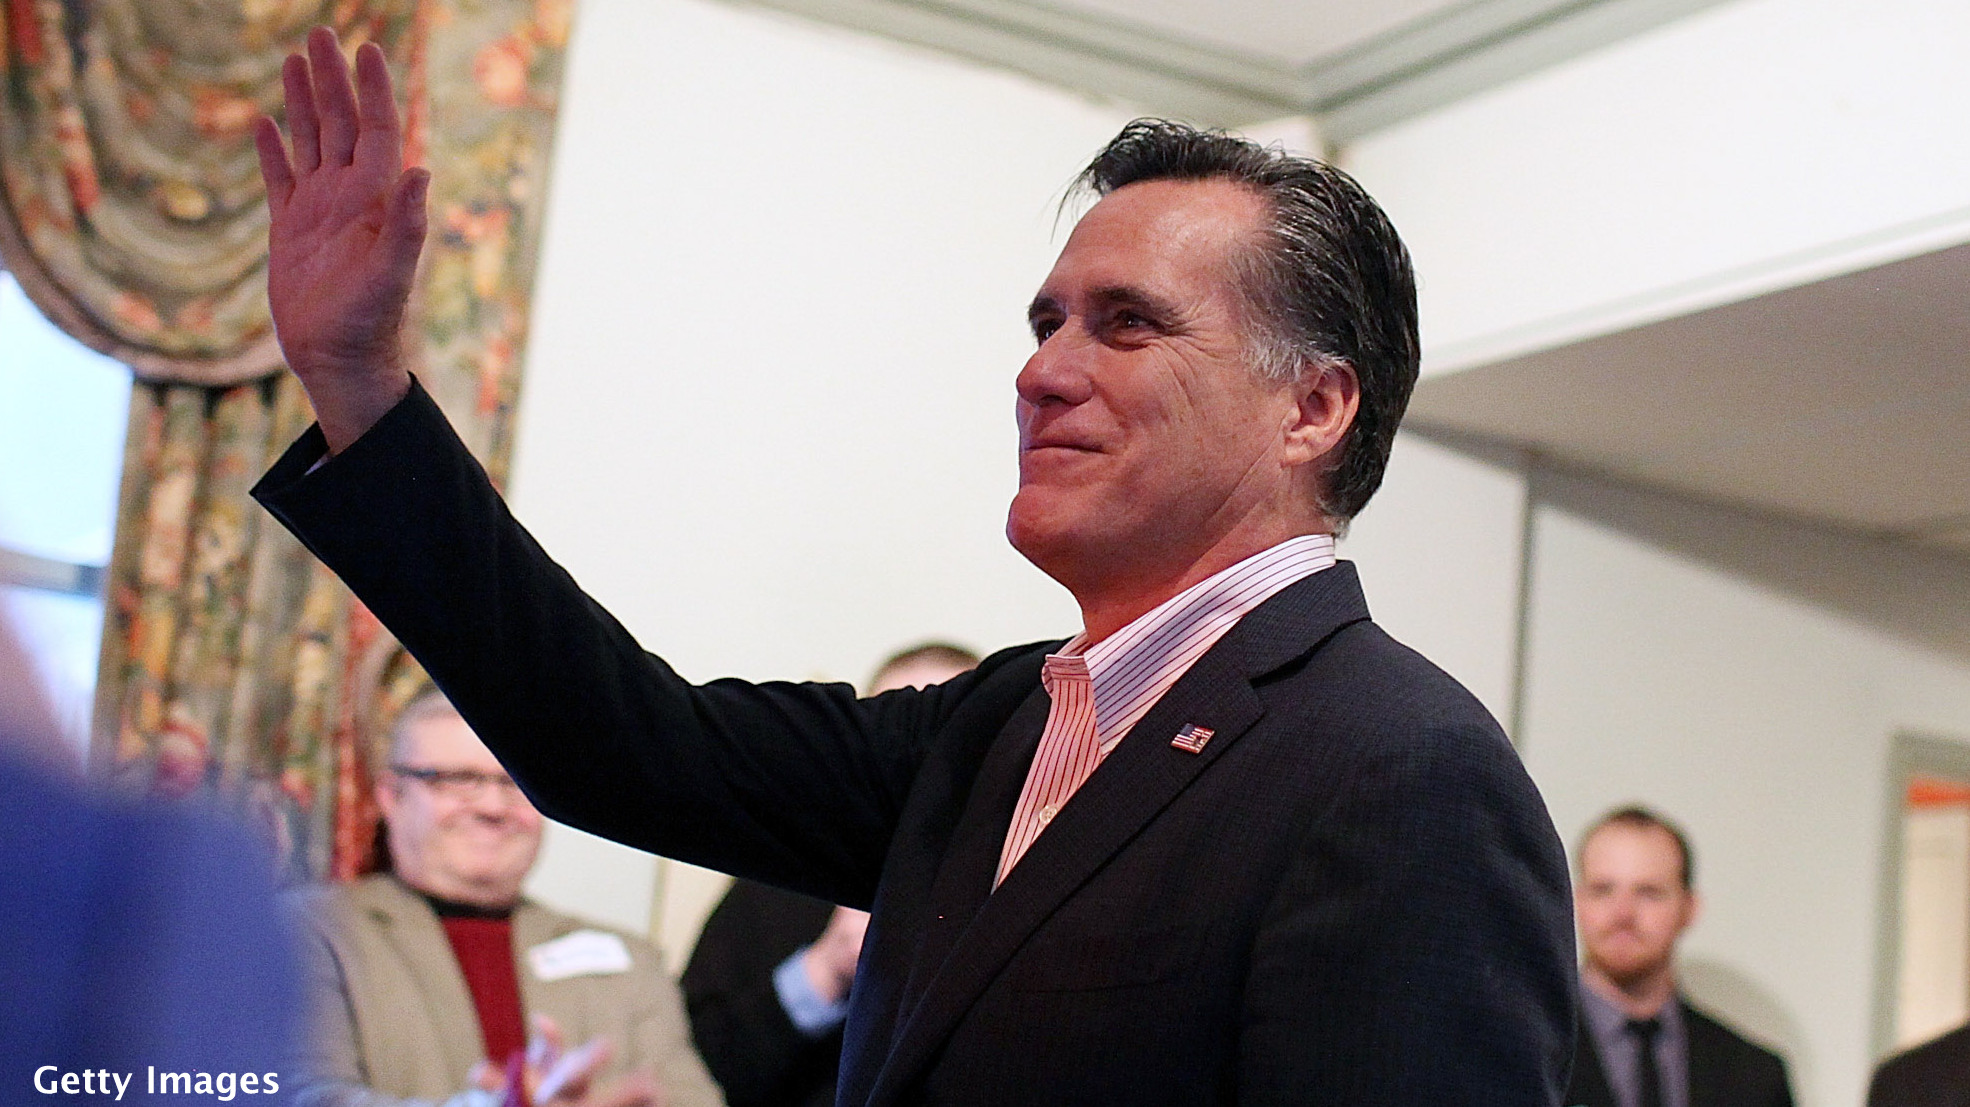 BREAKING: Romney wins Ohio primary, CNN projects